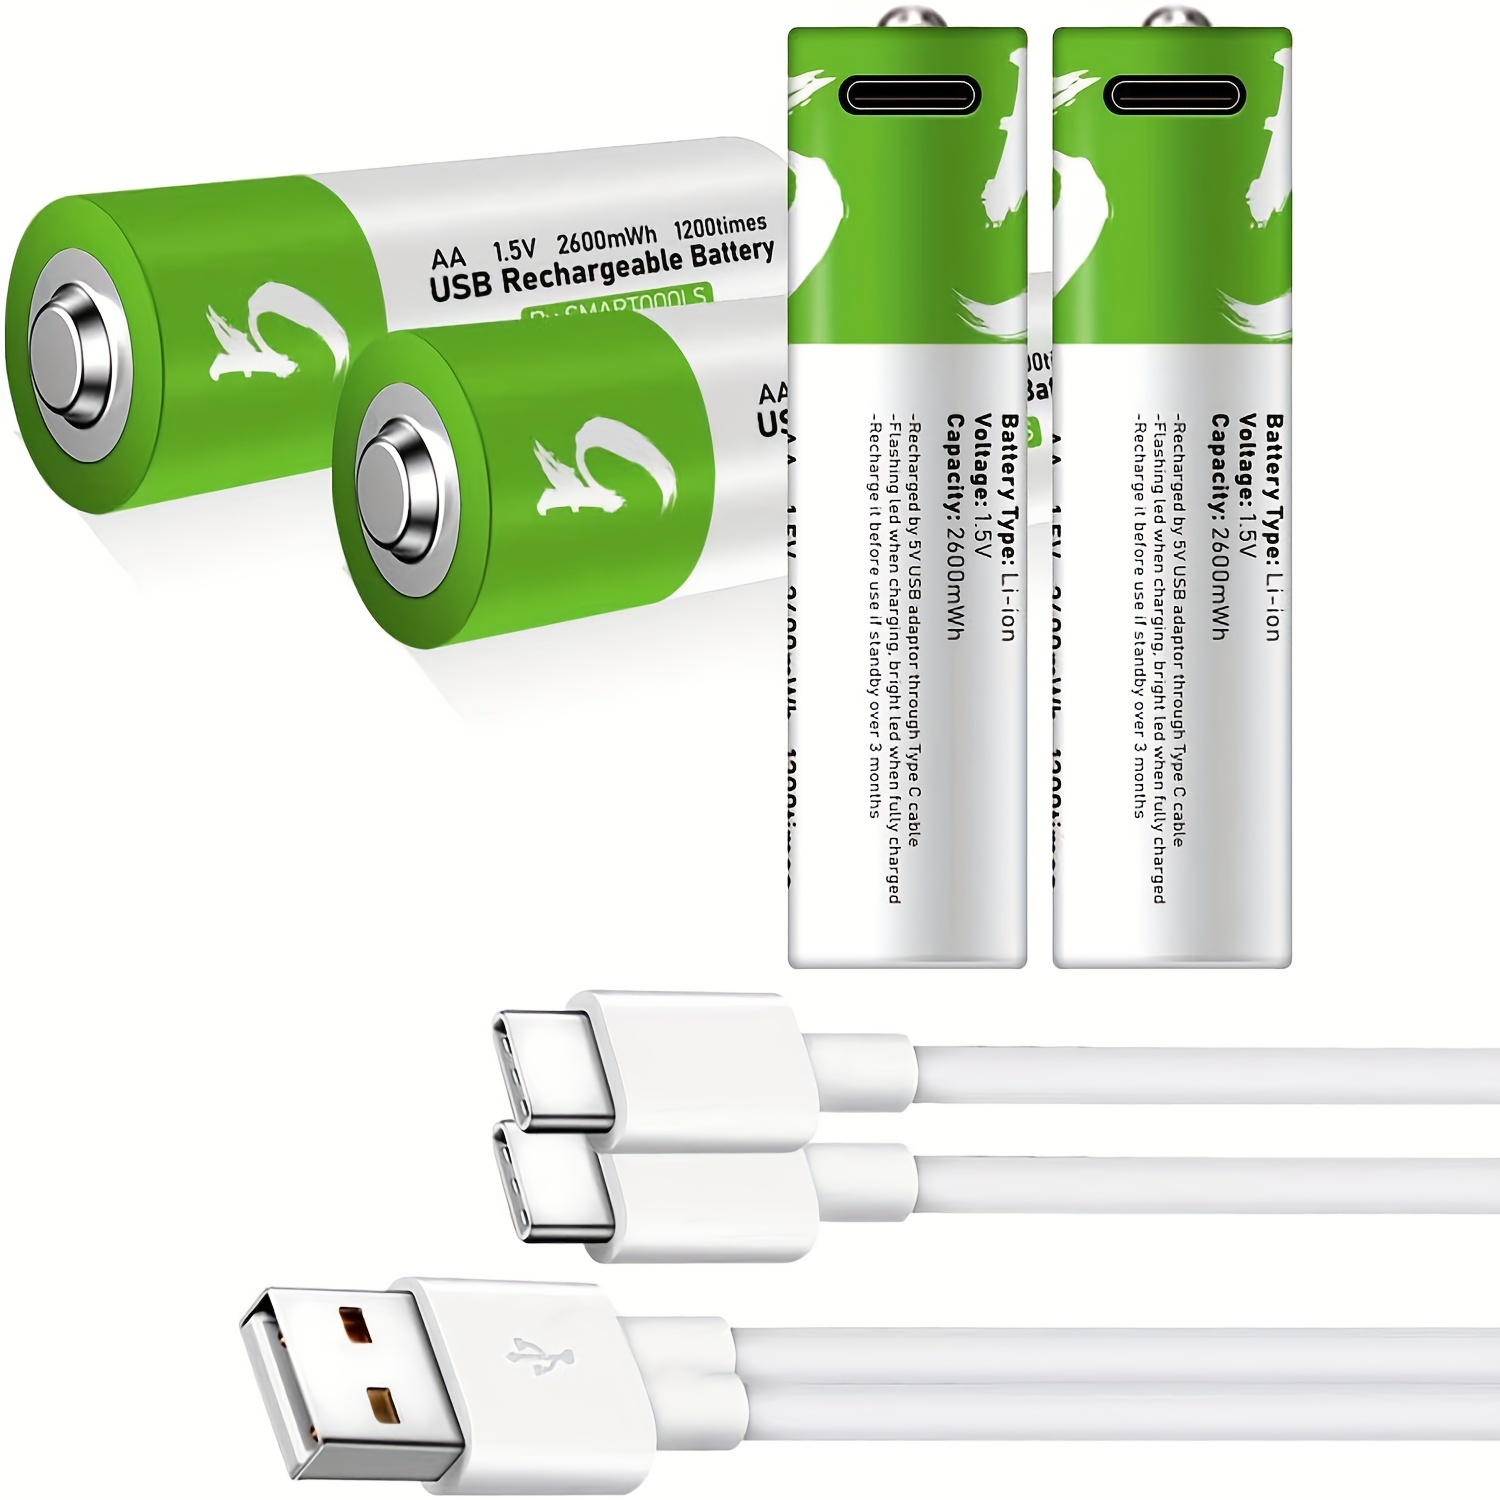 

2/4pcs Rechargeable Aa Batteries With Usb Type C Charger - 1.5v Constant Output 1.5hz, 2600mwh (≈1300mah)